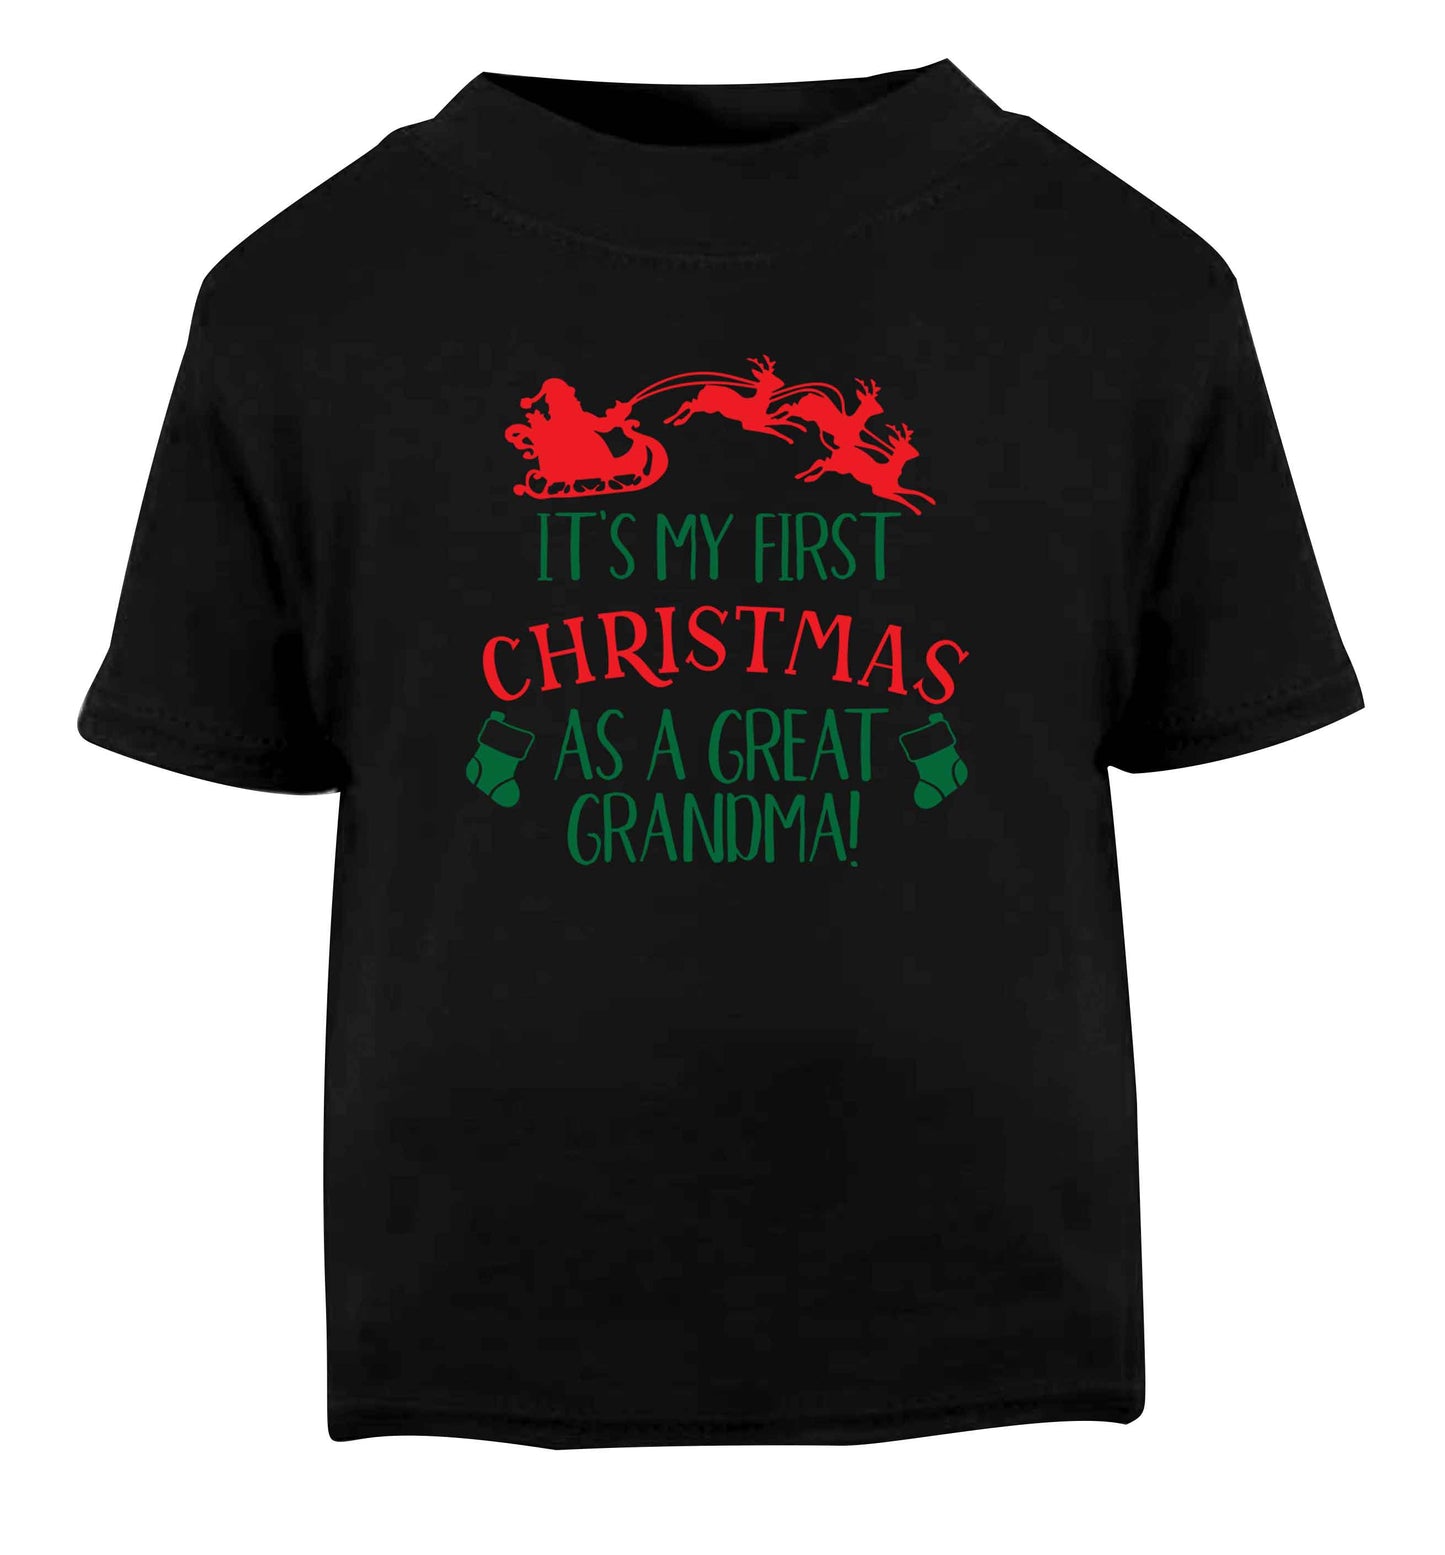 It's my first Christmas as a great grandma! Black Baby Toddler Tshirt 2 years